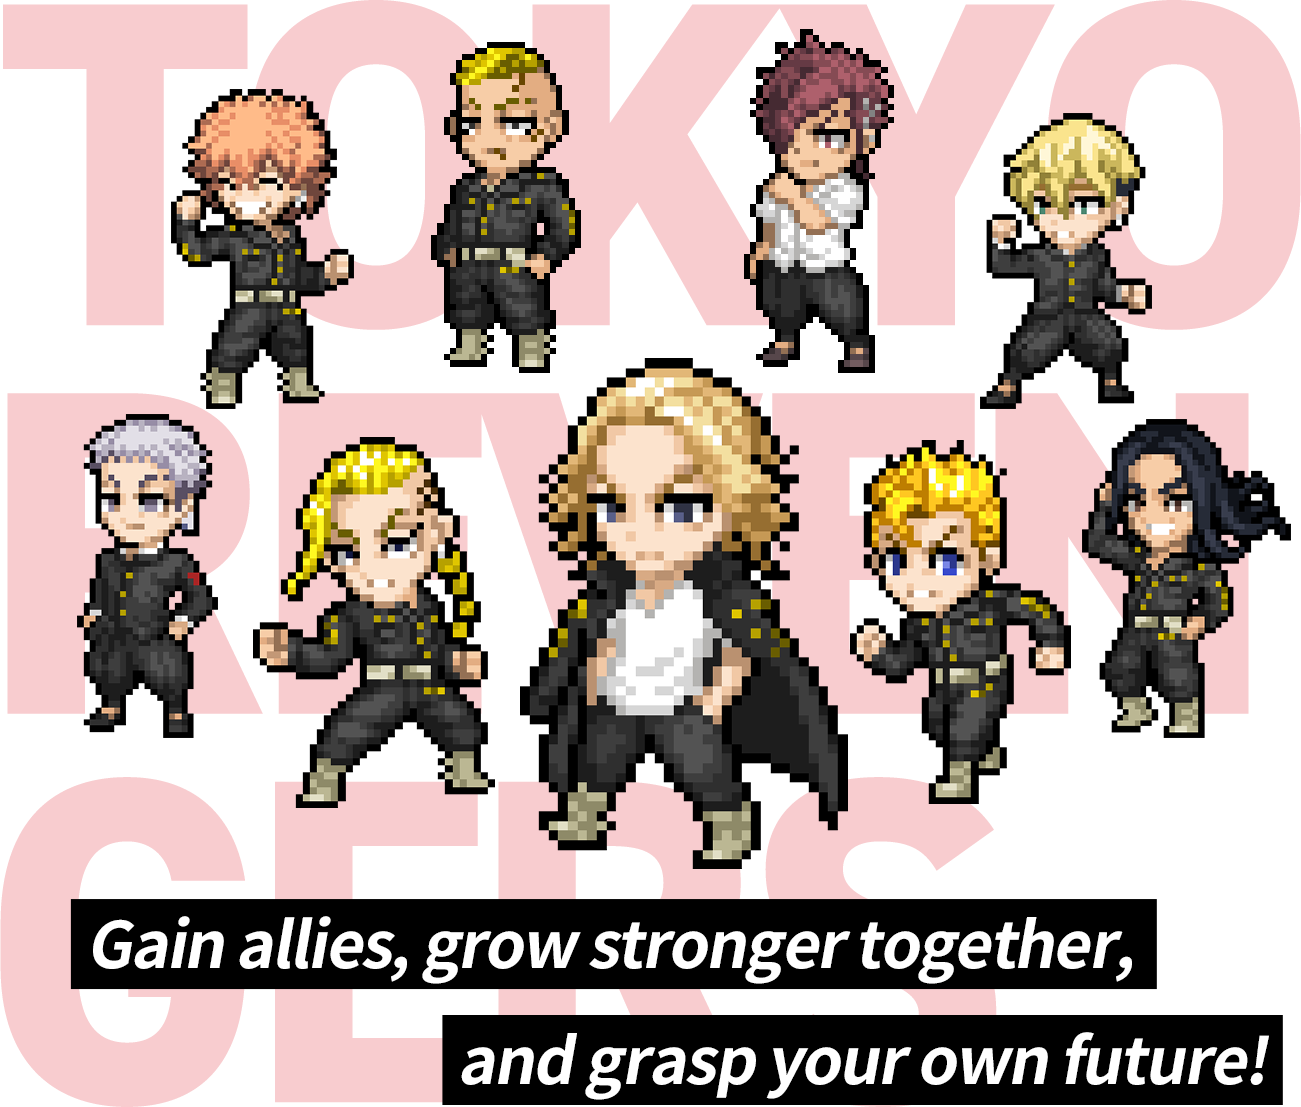 Gain allies, grow stronger together, and grasp your own future!